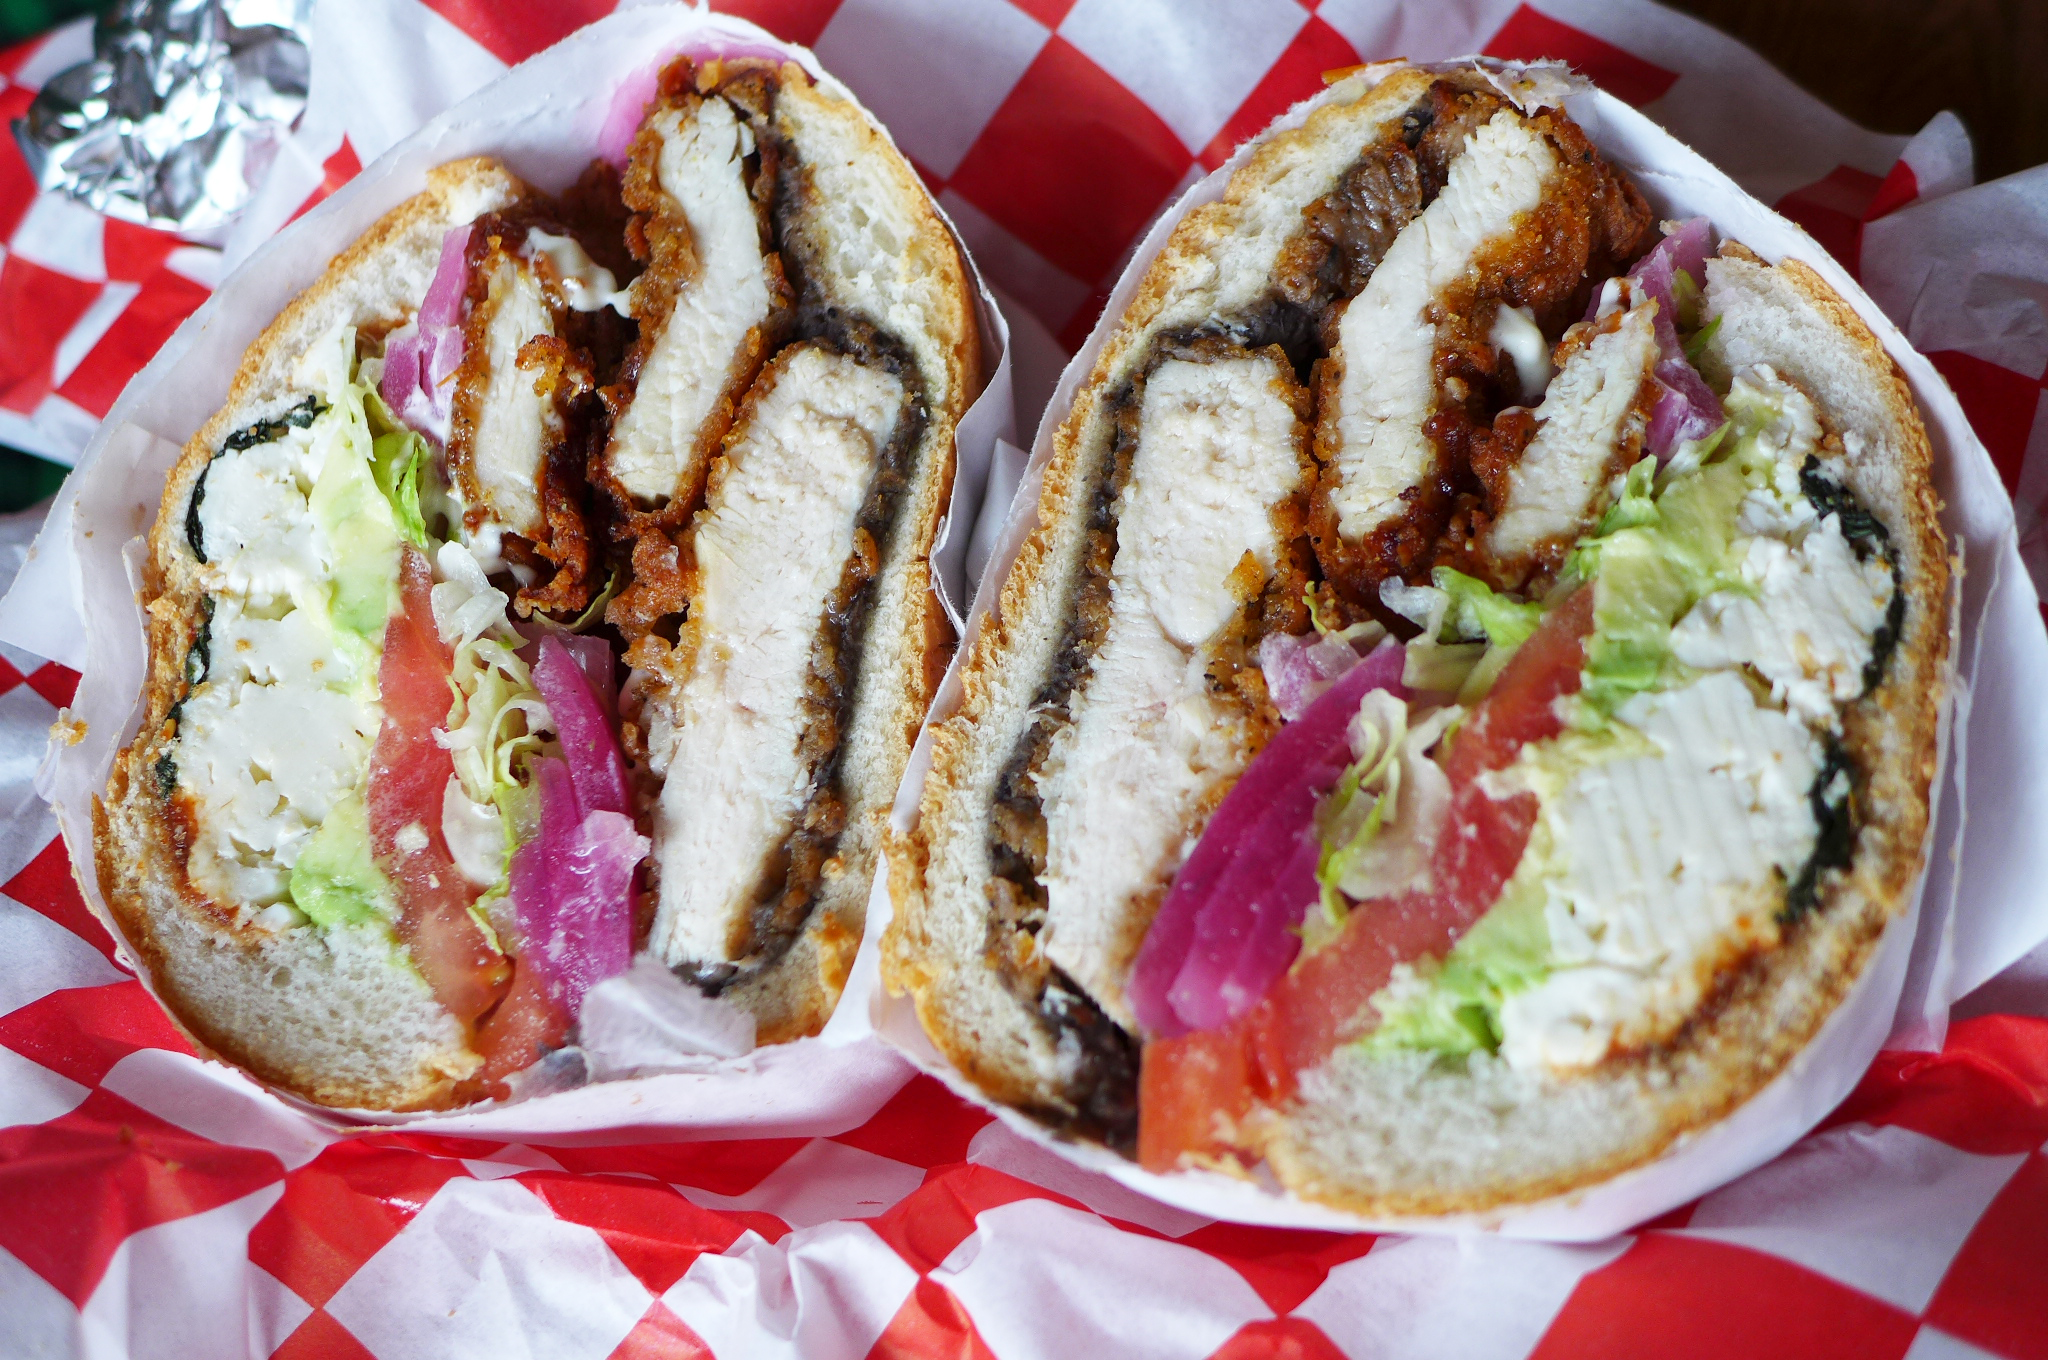 A Mexican cemita sandwich loaded with fried chicken seen in cross section.